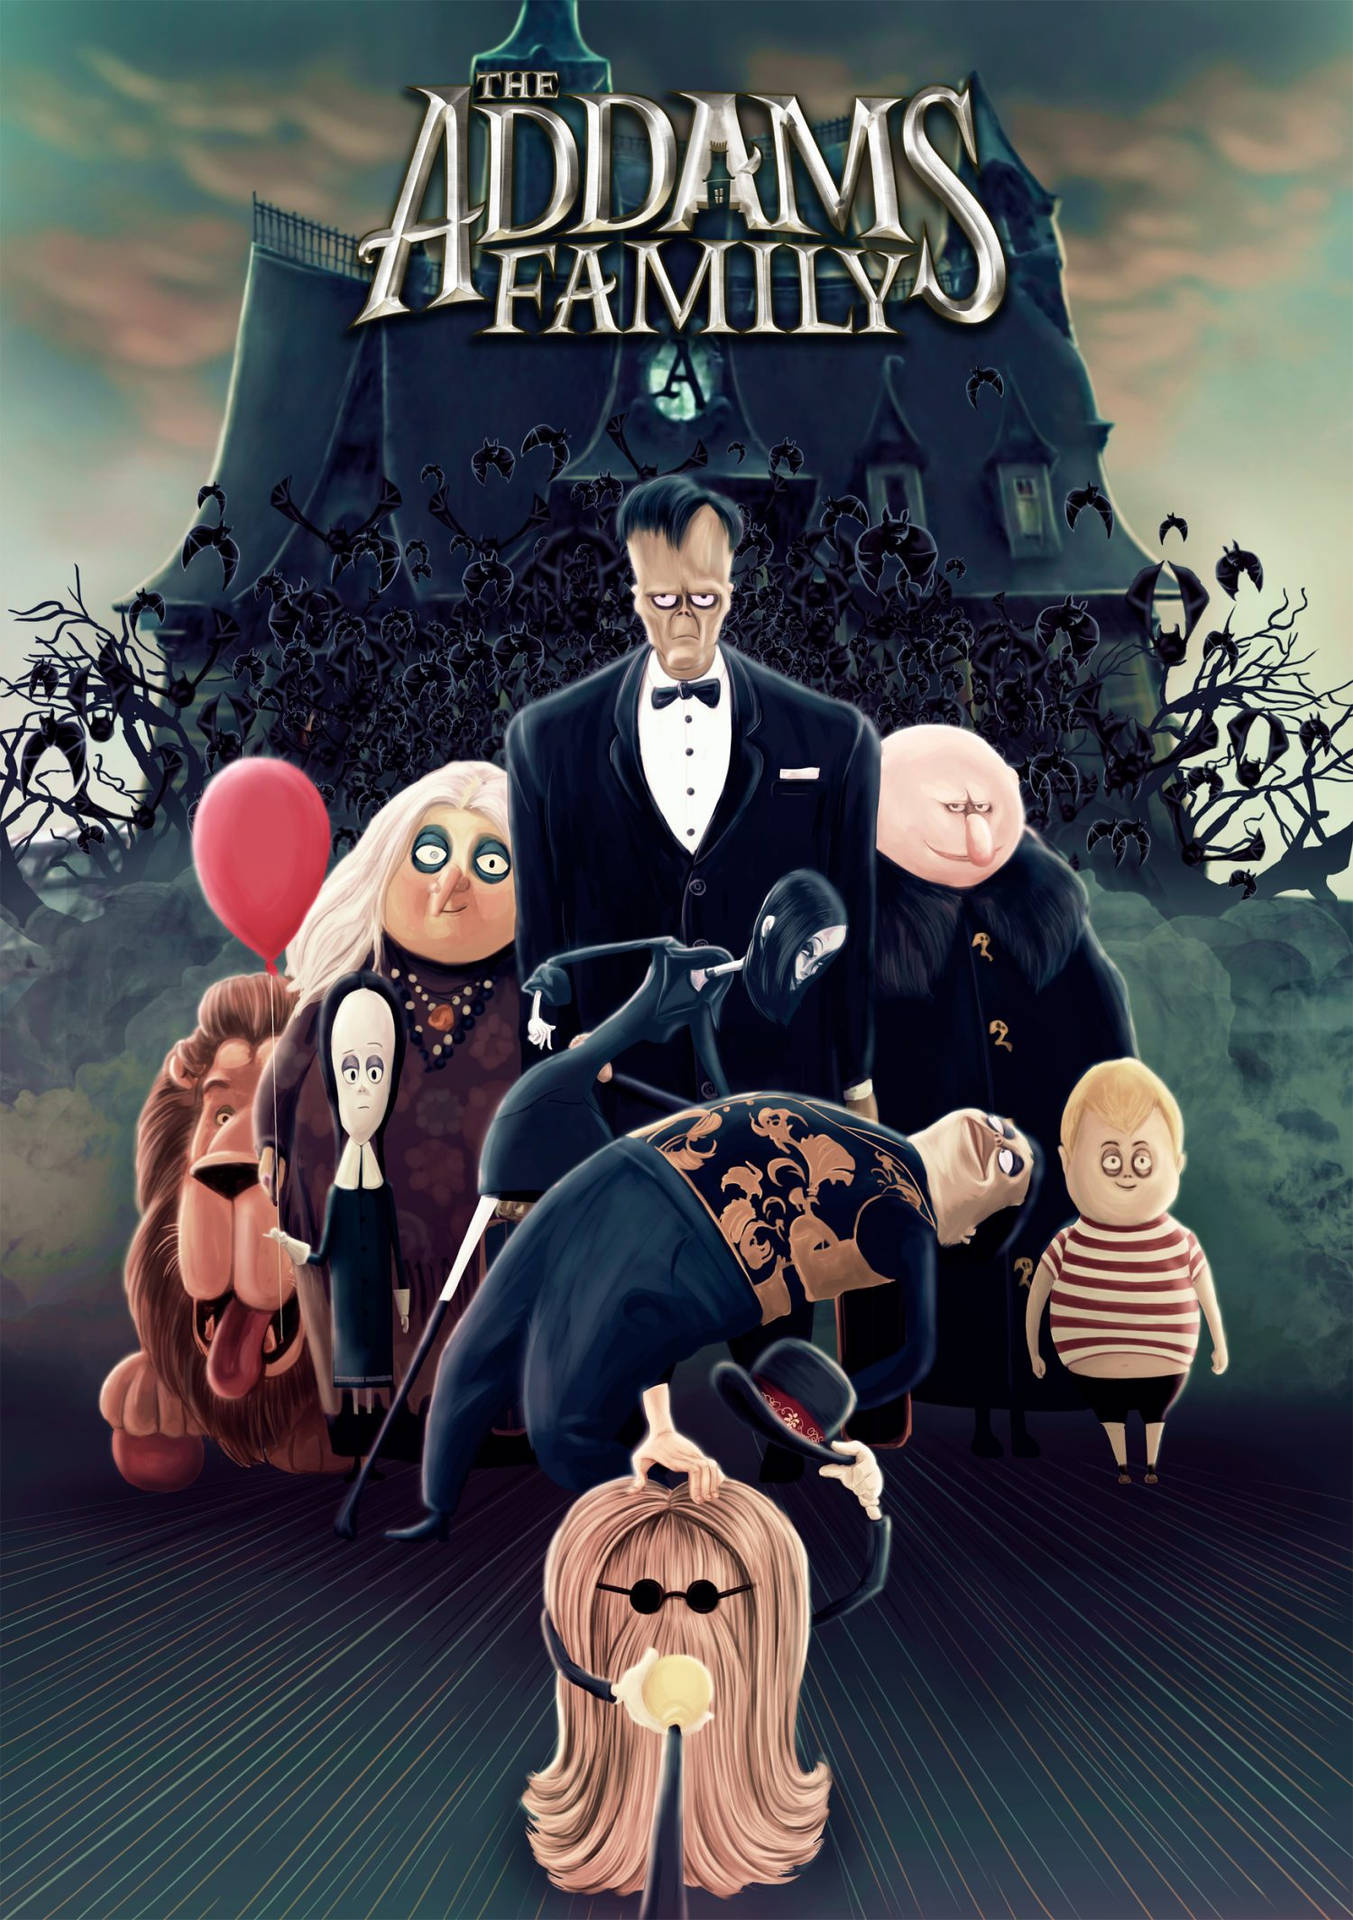 The Addams Family Creepy Poster Background